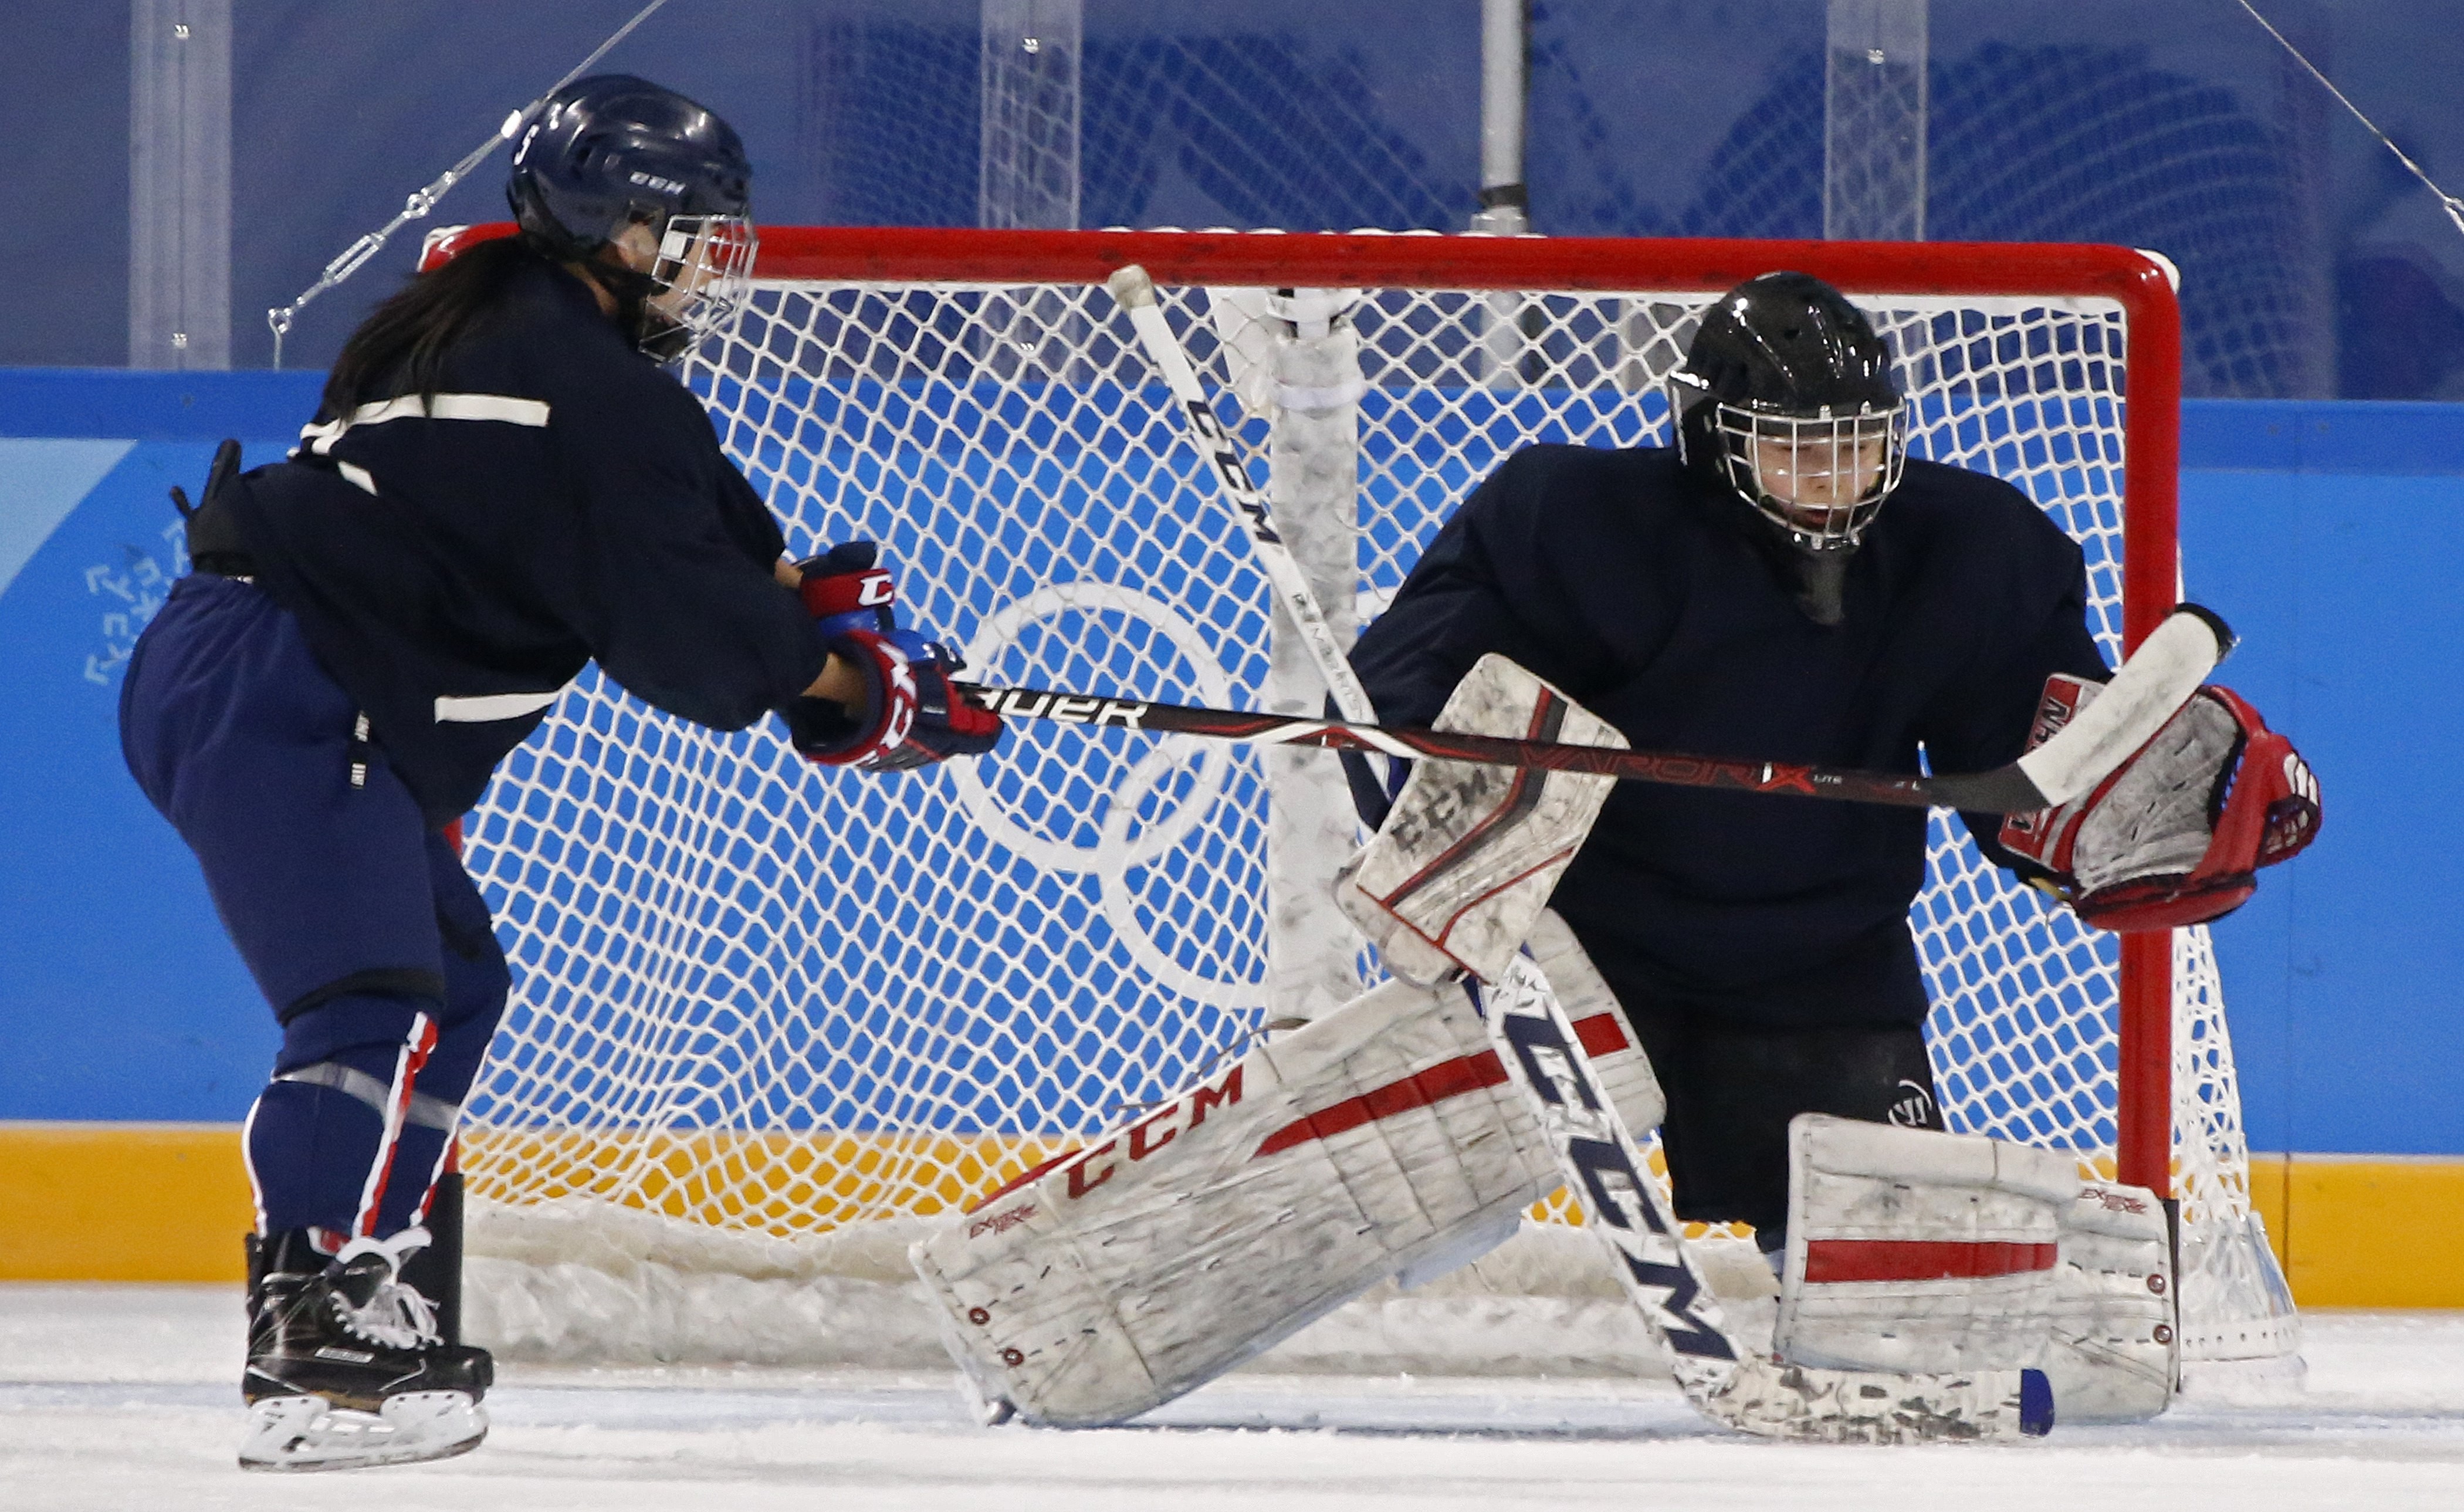 Members of the unified Korean women's hockey team practise at the Kwandong Hockey Centre for the PyeongChang Winter Olympic Games 2018. The decision to field a unified team came after a meeting between North and South Korea, following tensions on Korean peninsula. Photo: EPA-EFE